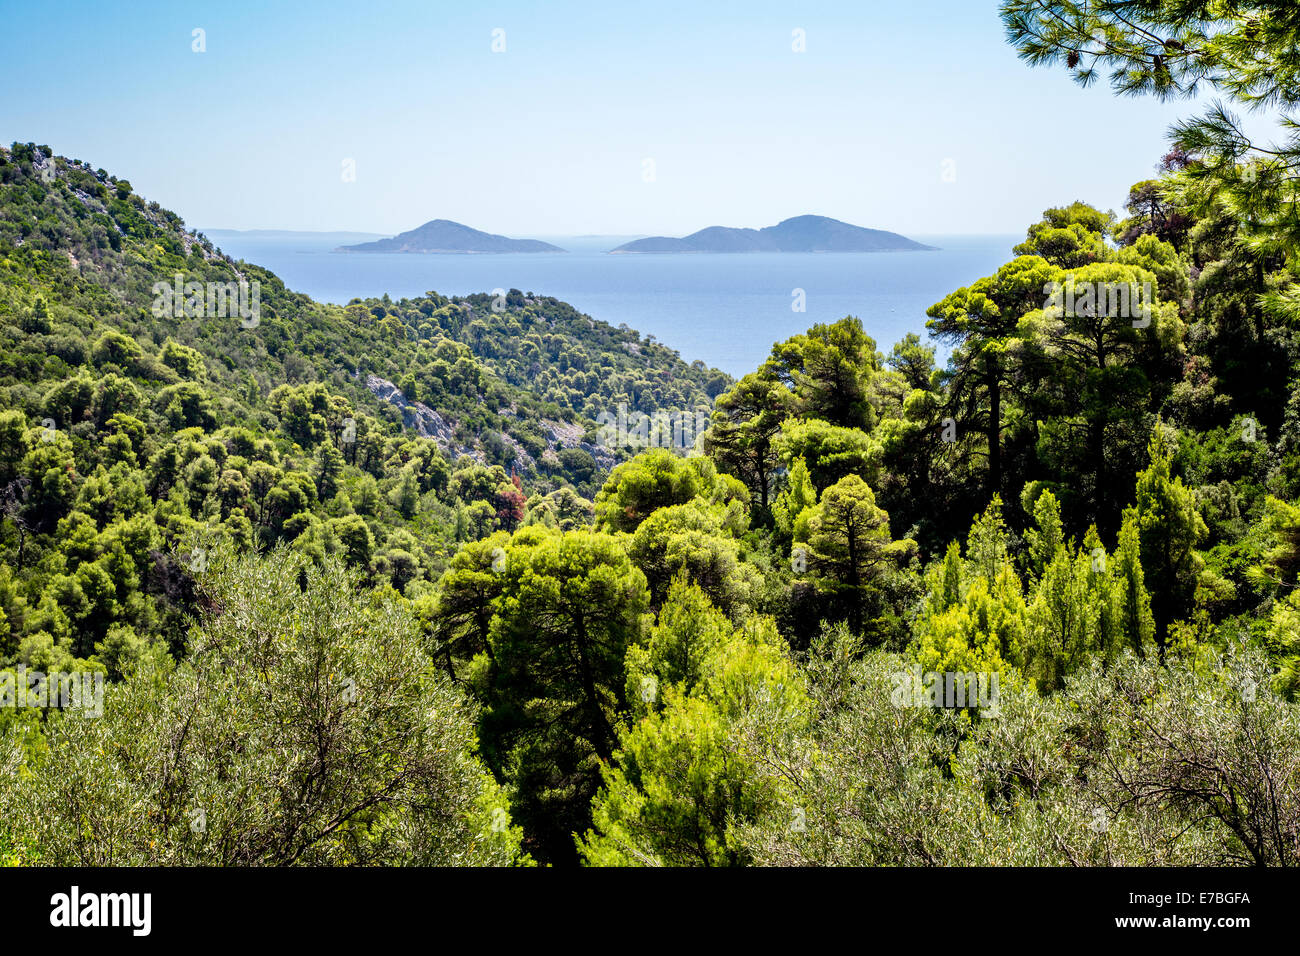 The Adelfi islands Megalo and Micro known as ' The Brothers ' from the wooded coast of Alonissos in the Sporades Islands Greece Stock Photo